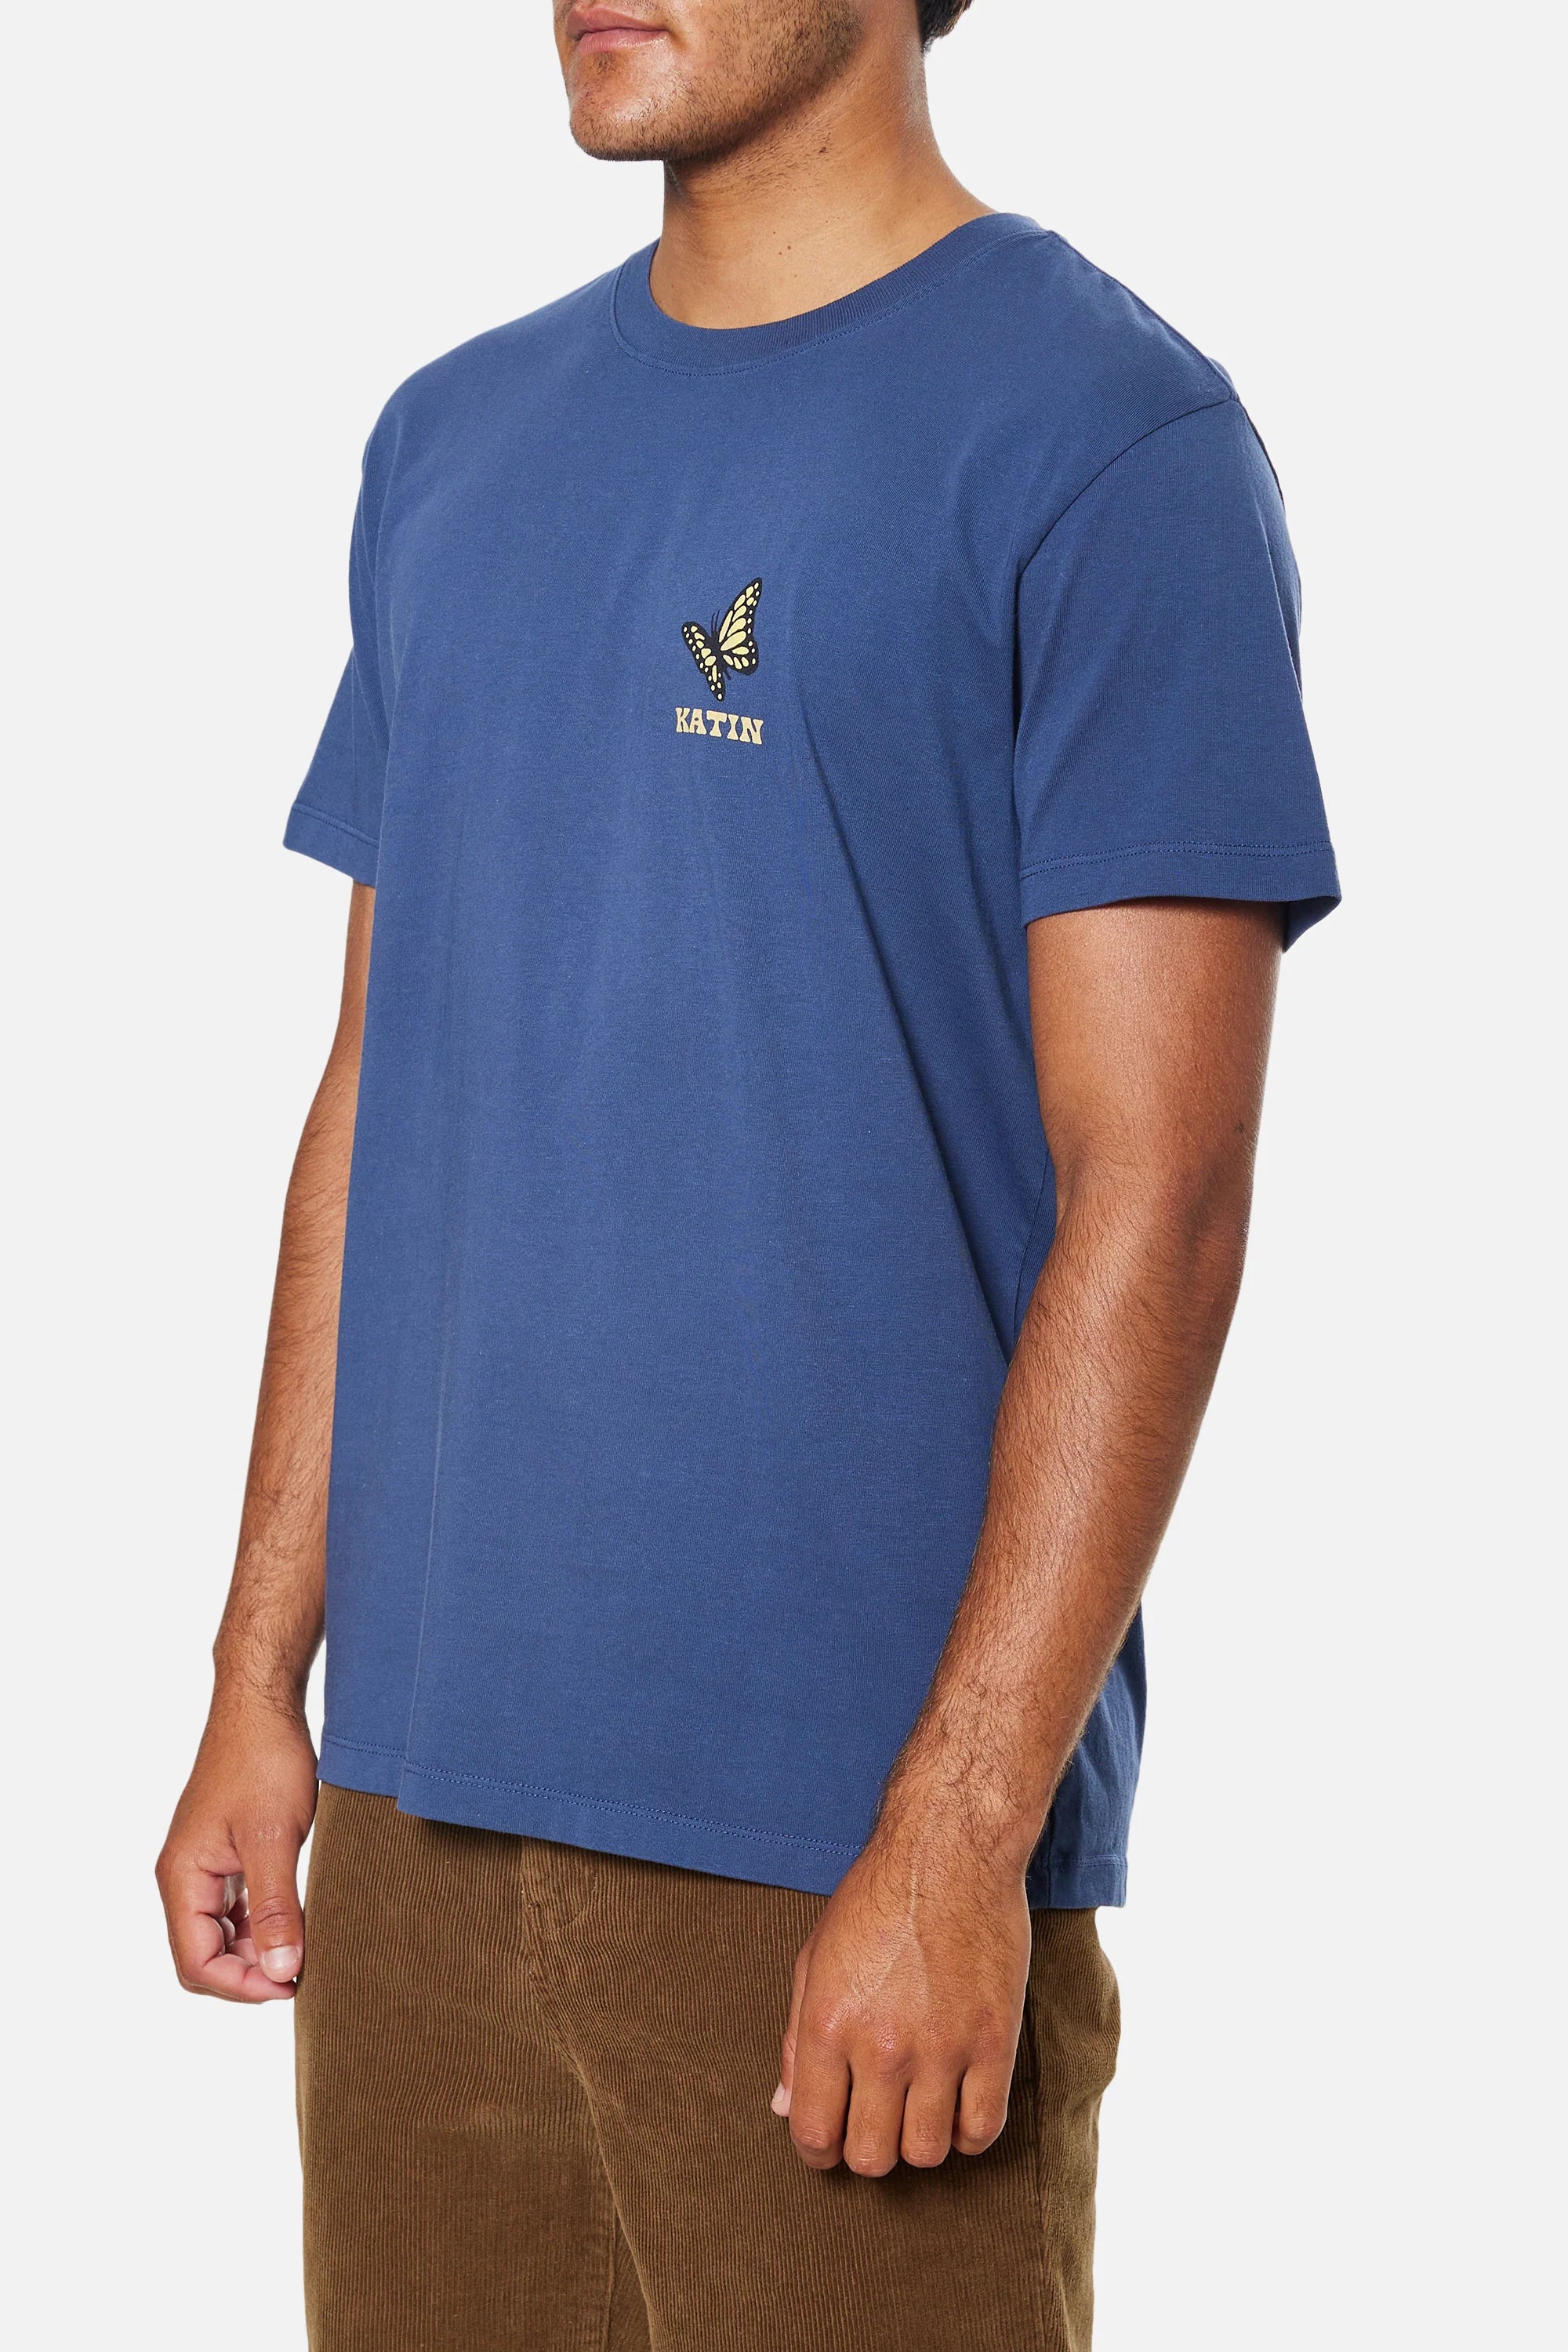 Monarch Tee "Washed Blue"